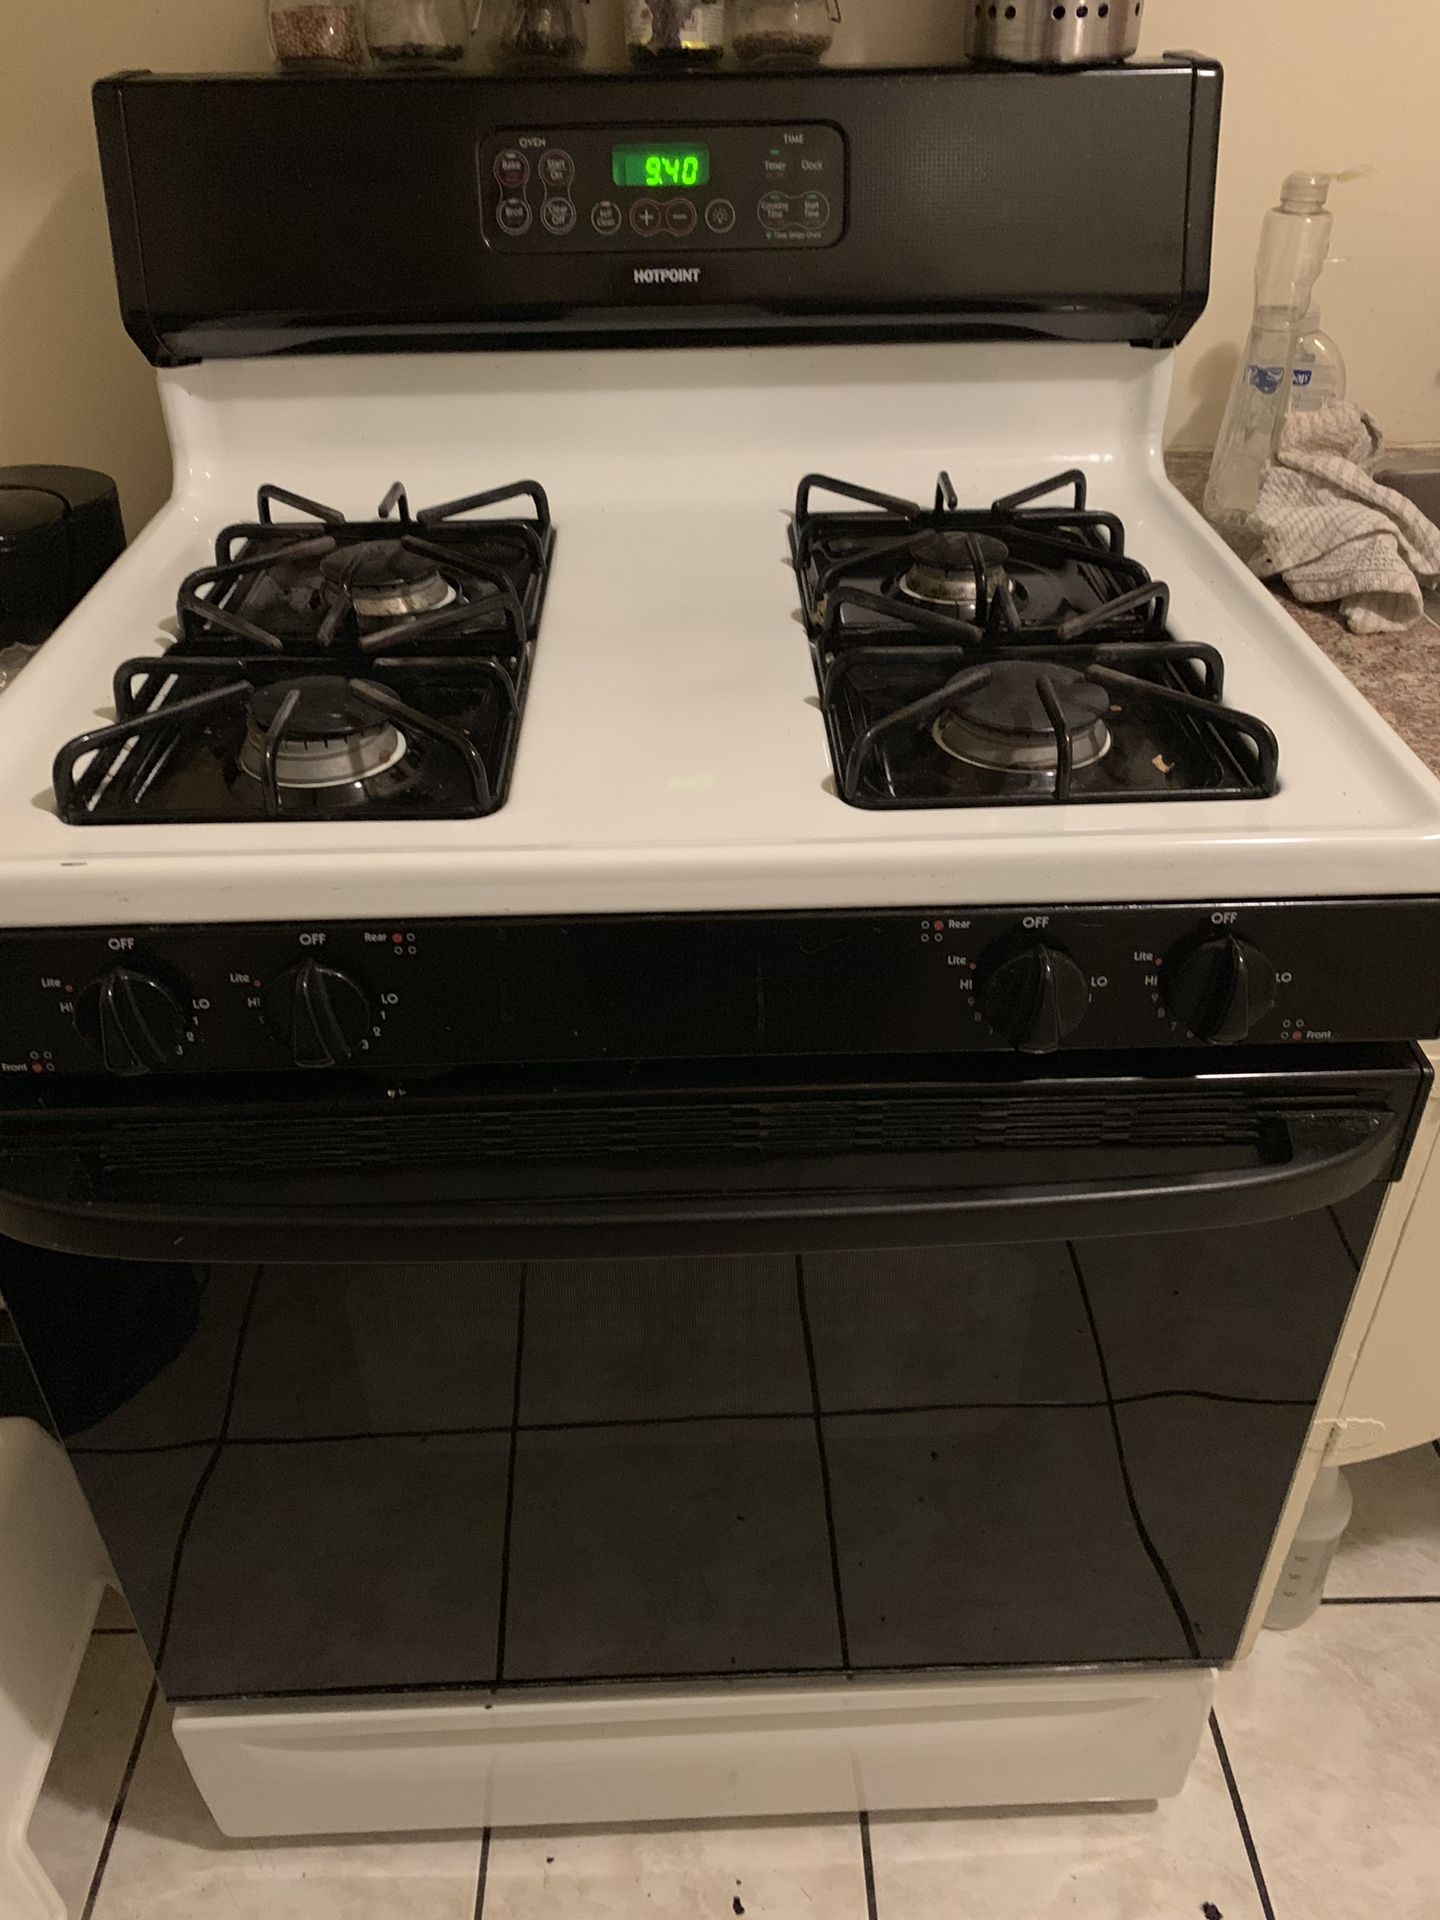 HotPoint Gas stove